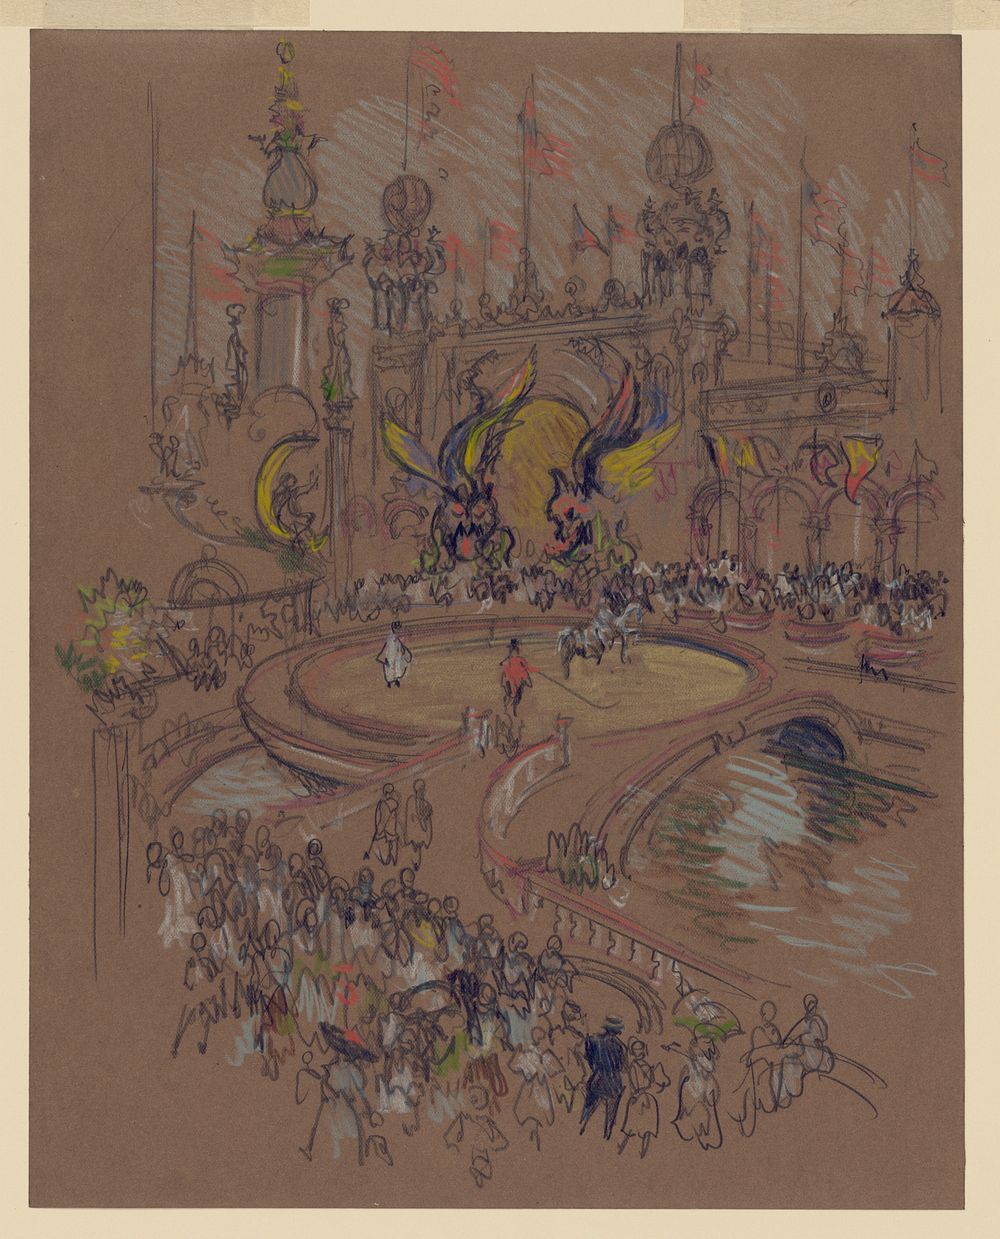 Coney Island (between ca. 1904 and 1908) drawing in high resolution by Joseph Pennell.